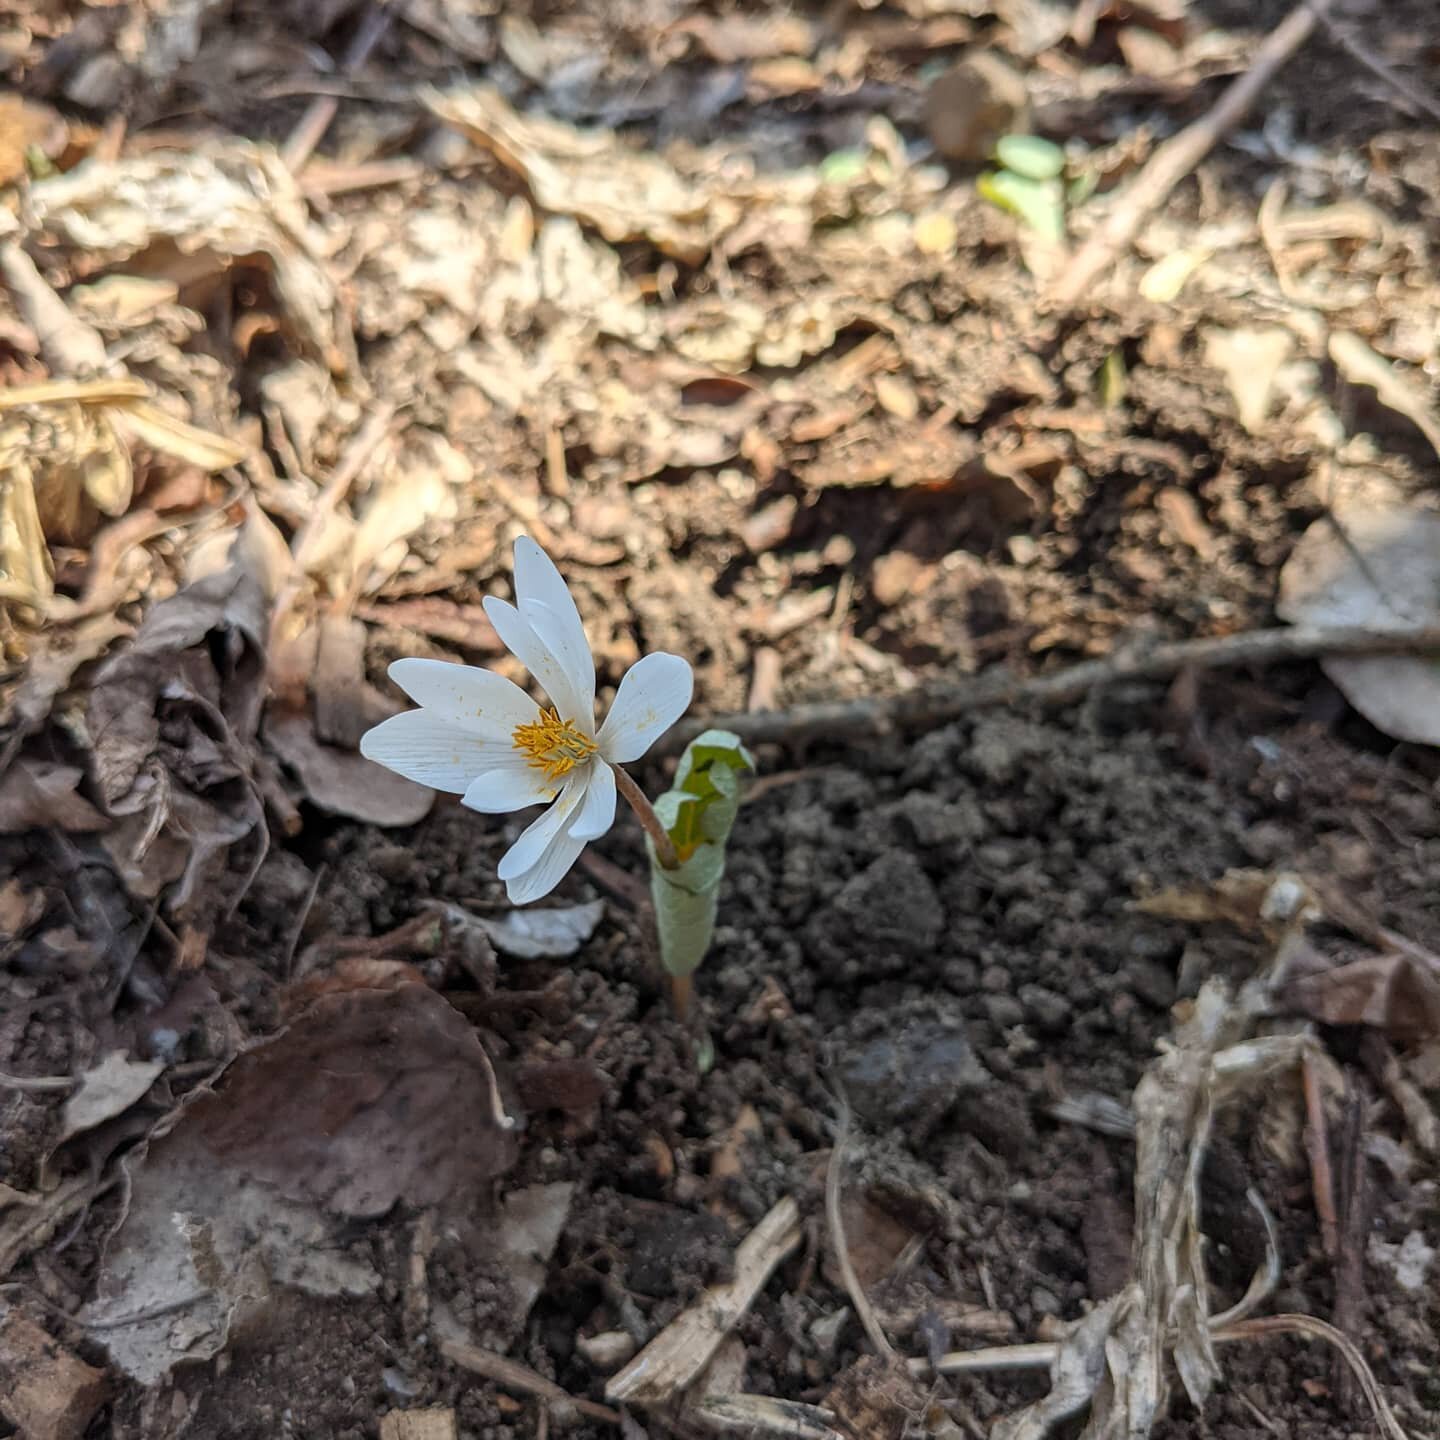 Love spring ephemerals. Here is blood root (Sanguinaria canadensis) a beautiful native species. They are pollinated by spring bees and their seeds are spread by ants. This plant happens to be in the woodland garden at my home :)